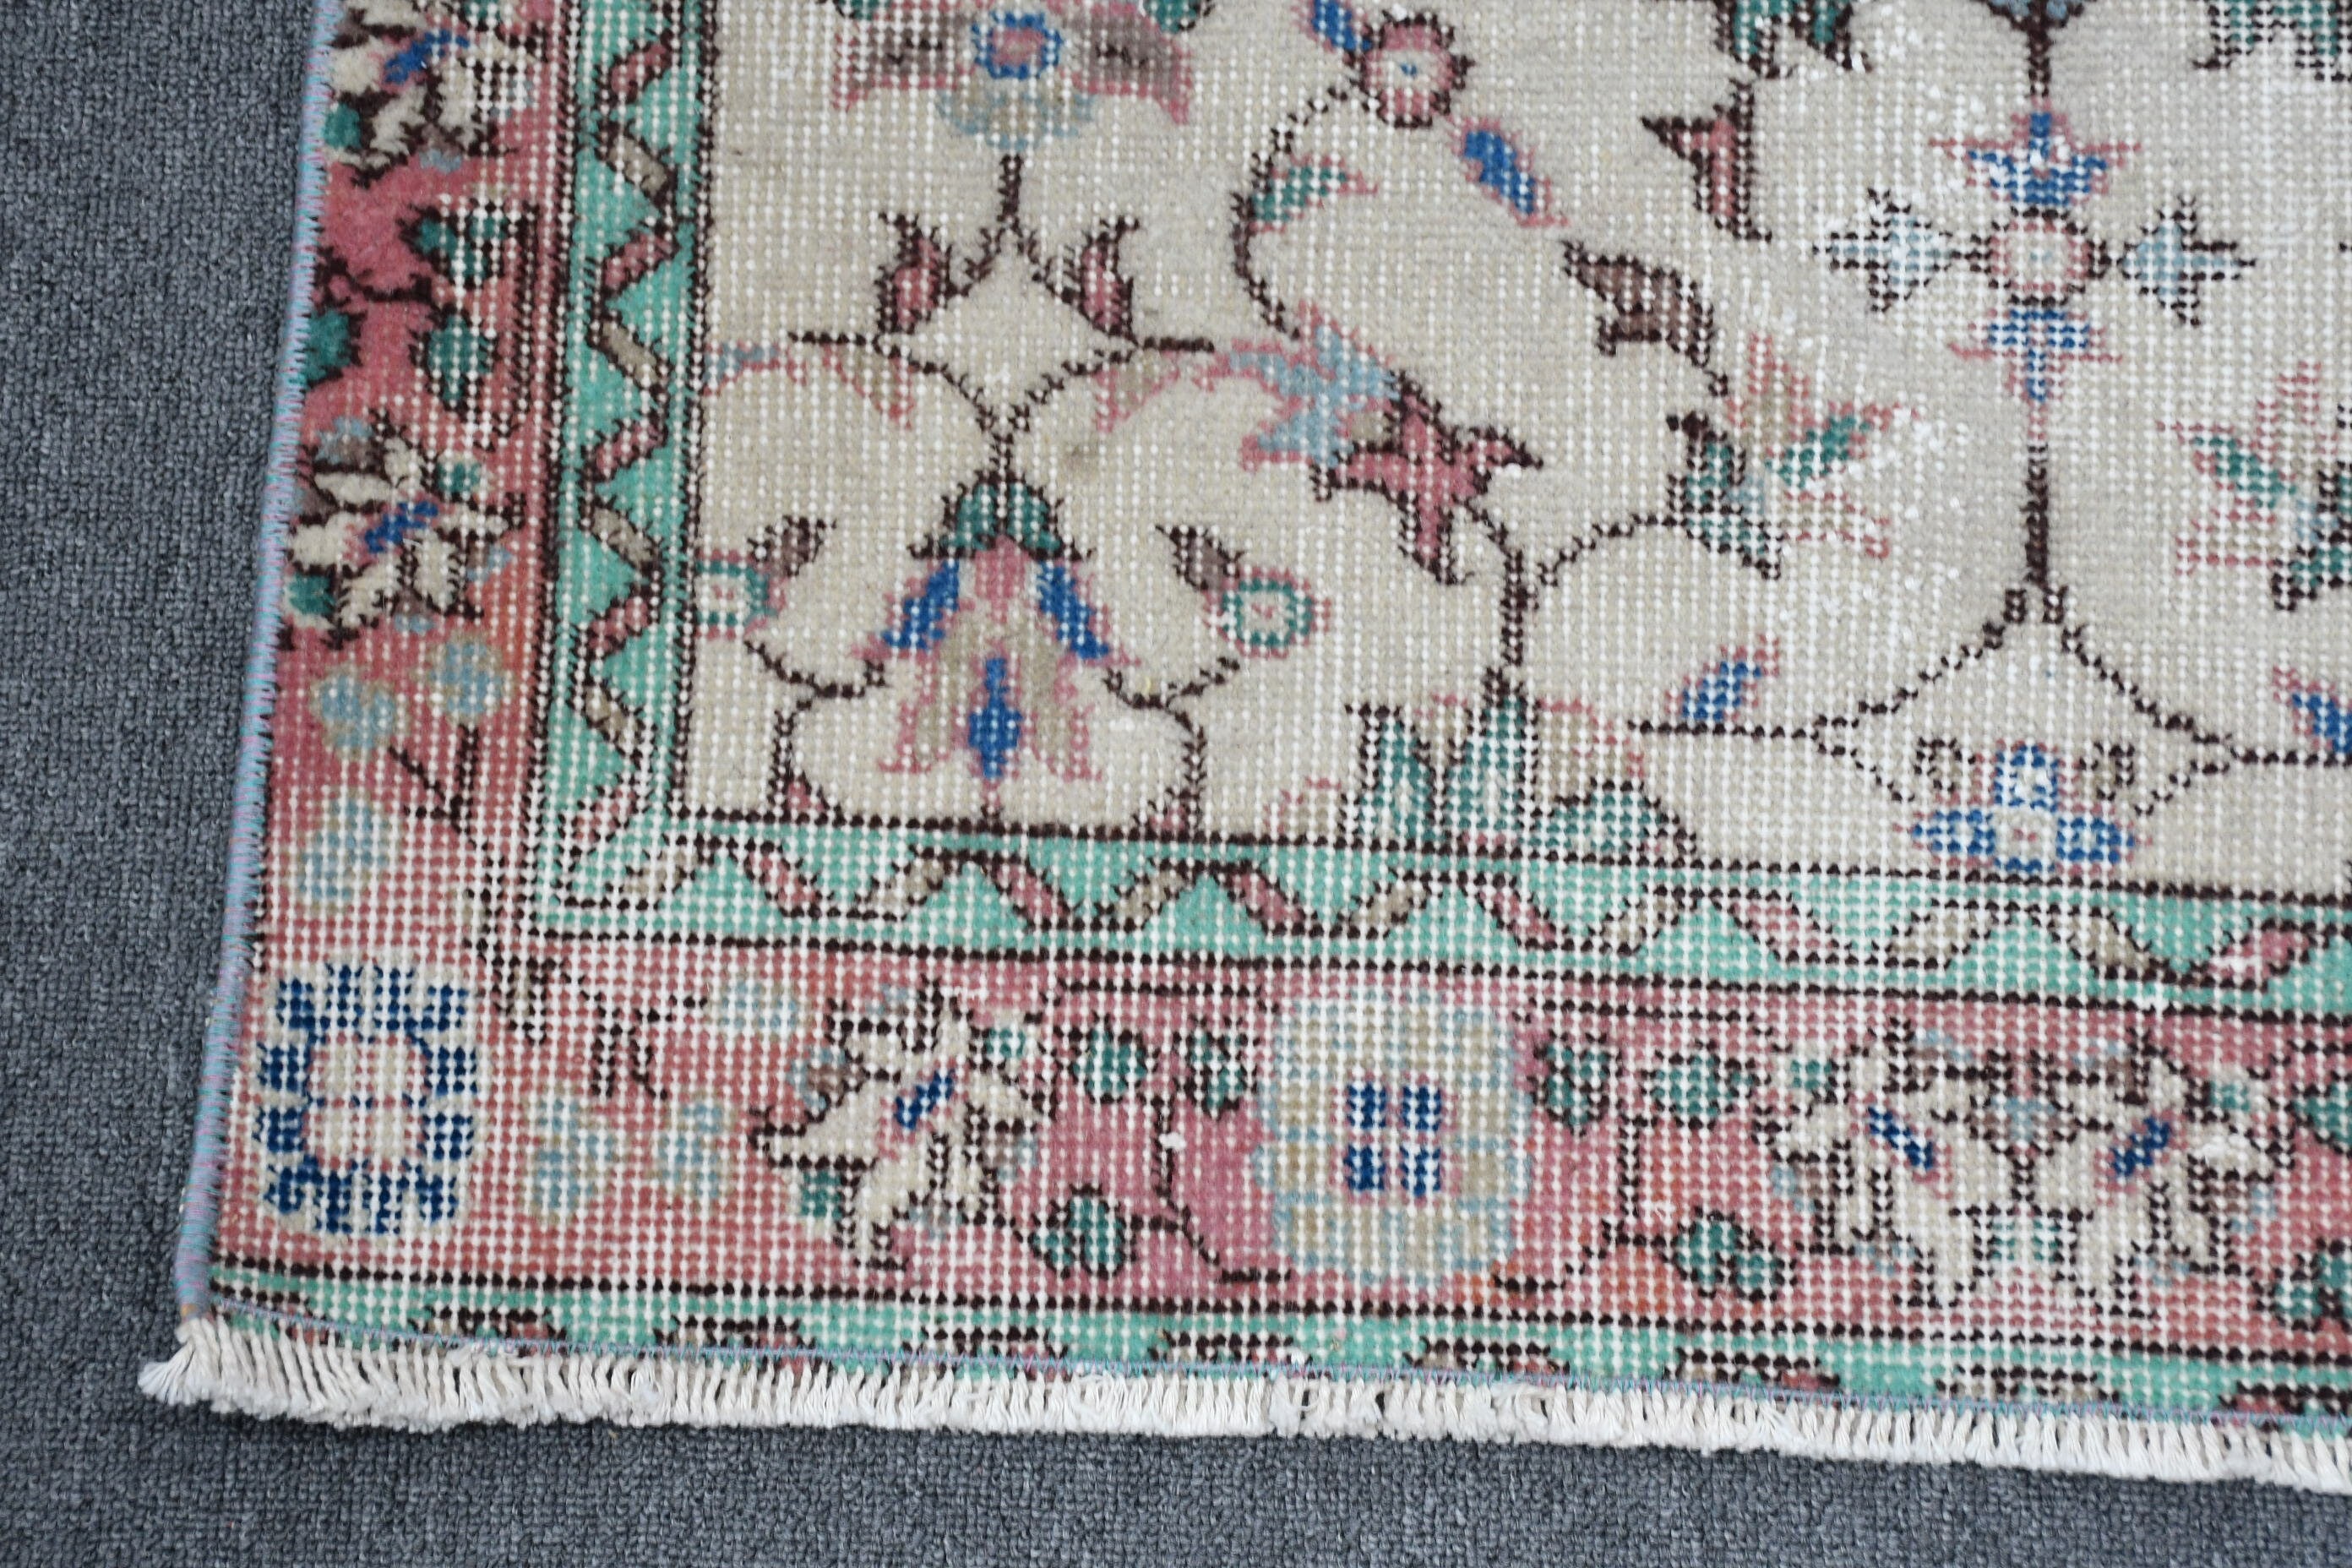 Vintage Rugs, Home Decor Rug, Rugs for Kitchen, Entry Rug, Kitchen Rugs, Wool Rugs, Distressed Rug, 2.8x6.4 ft Accent Rugs, Turkish Rug